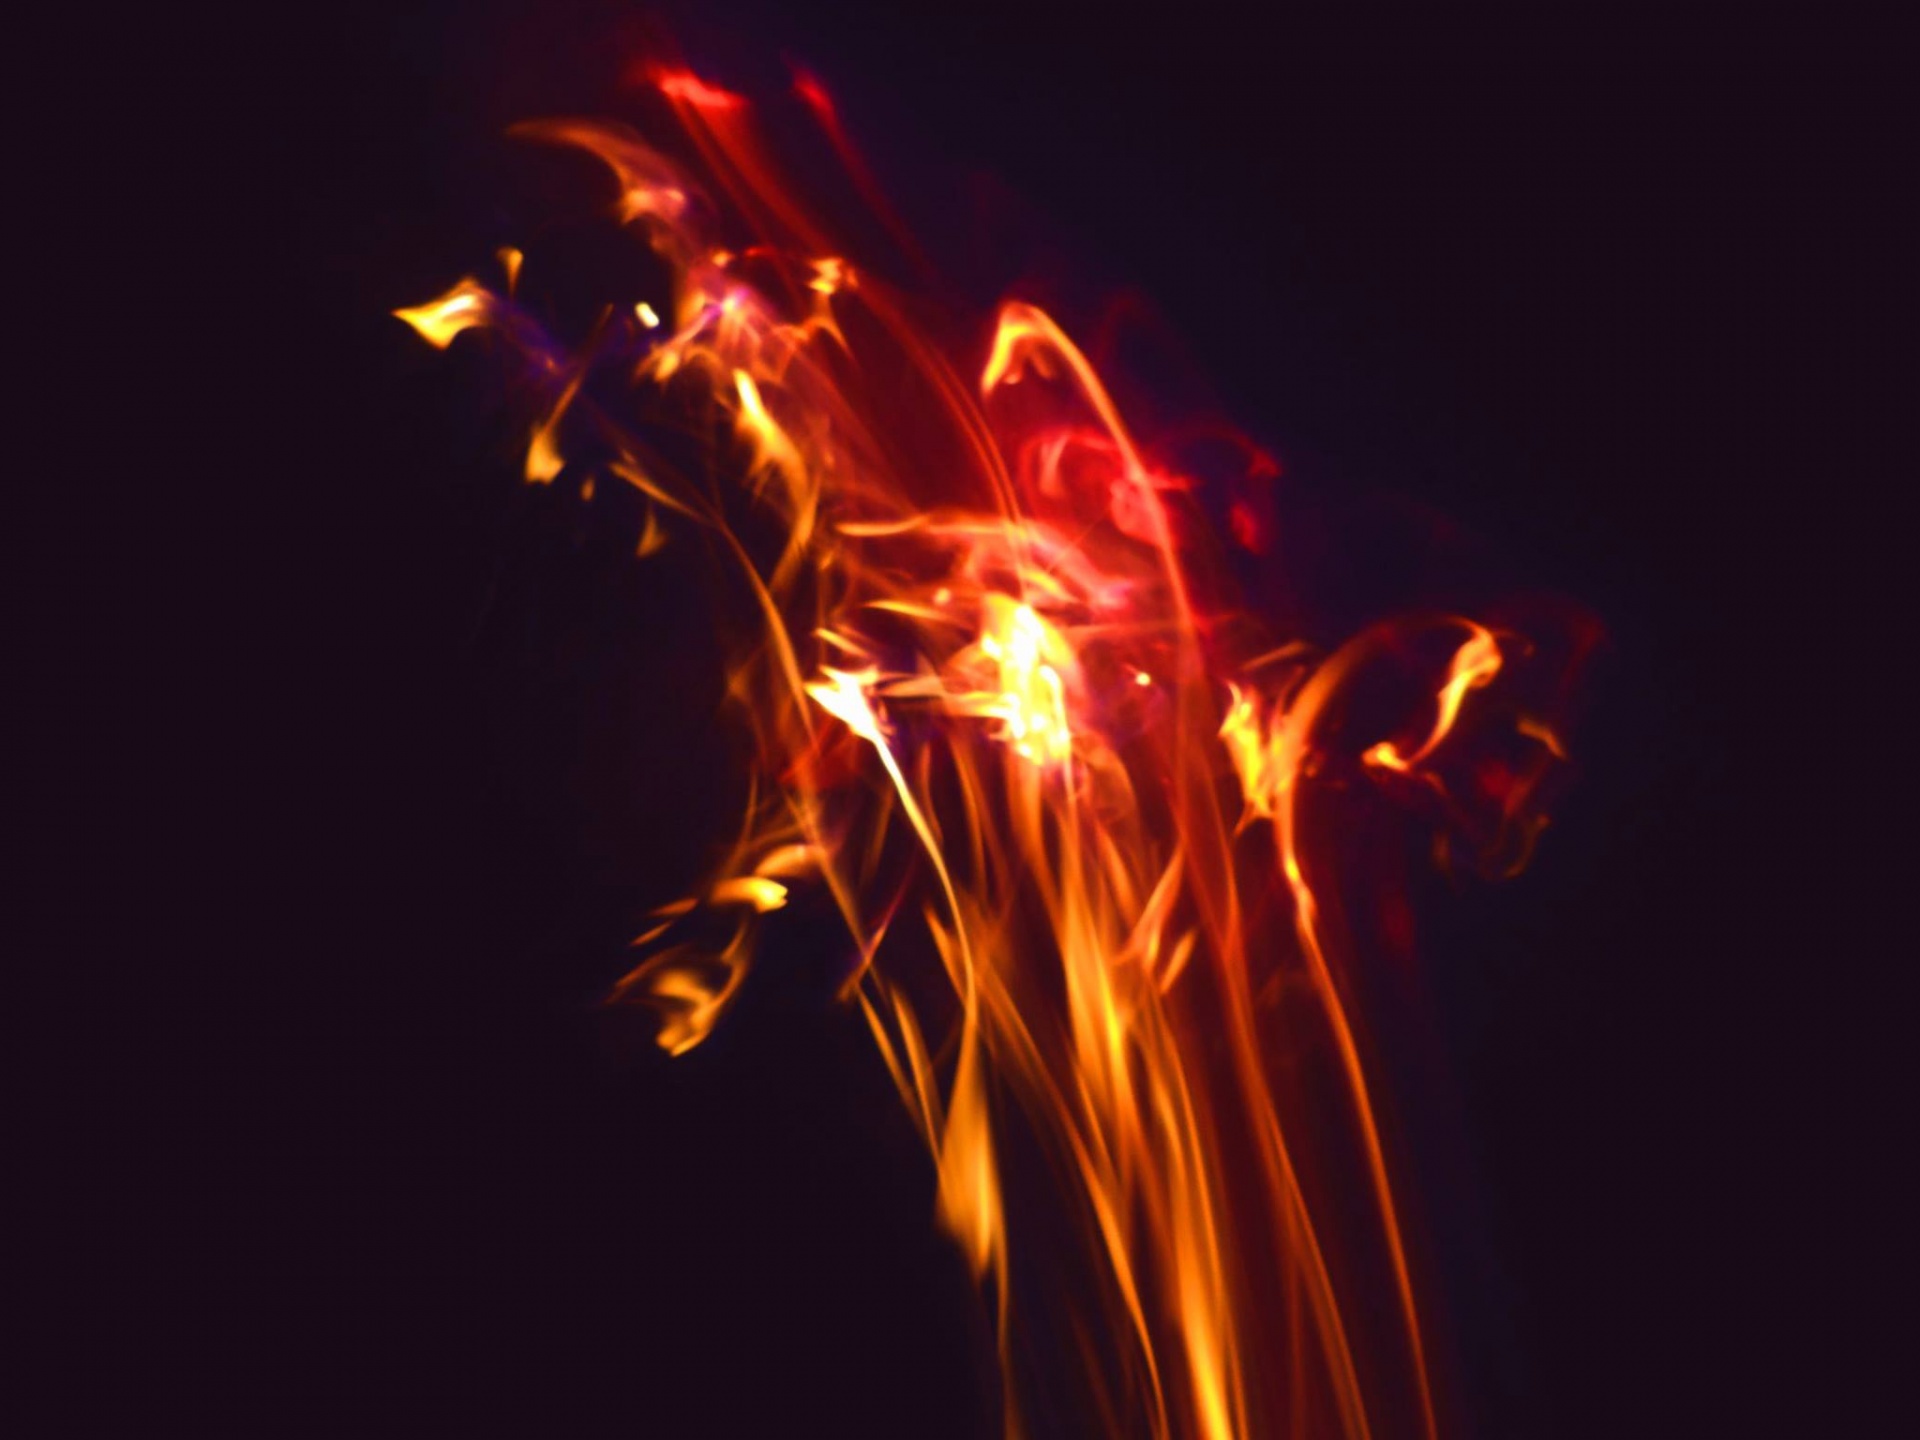 Download Bonfire At Night Fire Abstract Photography Free Photo.